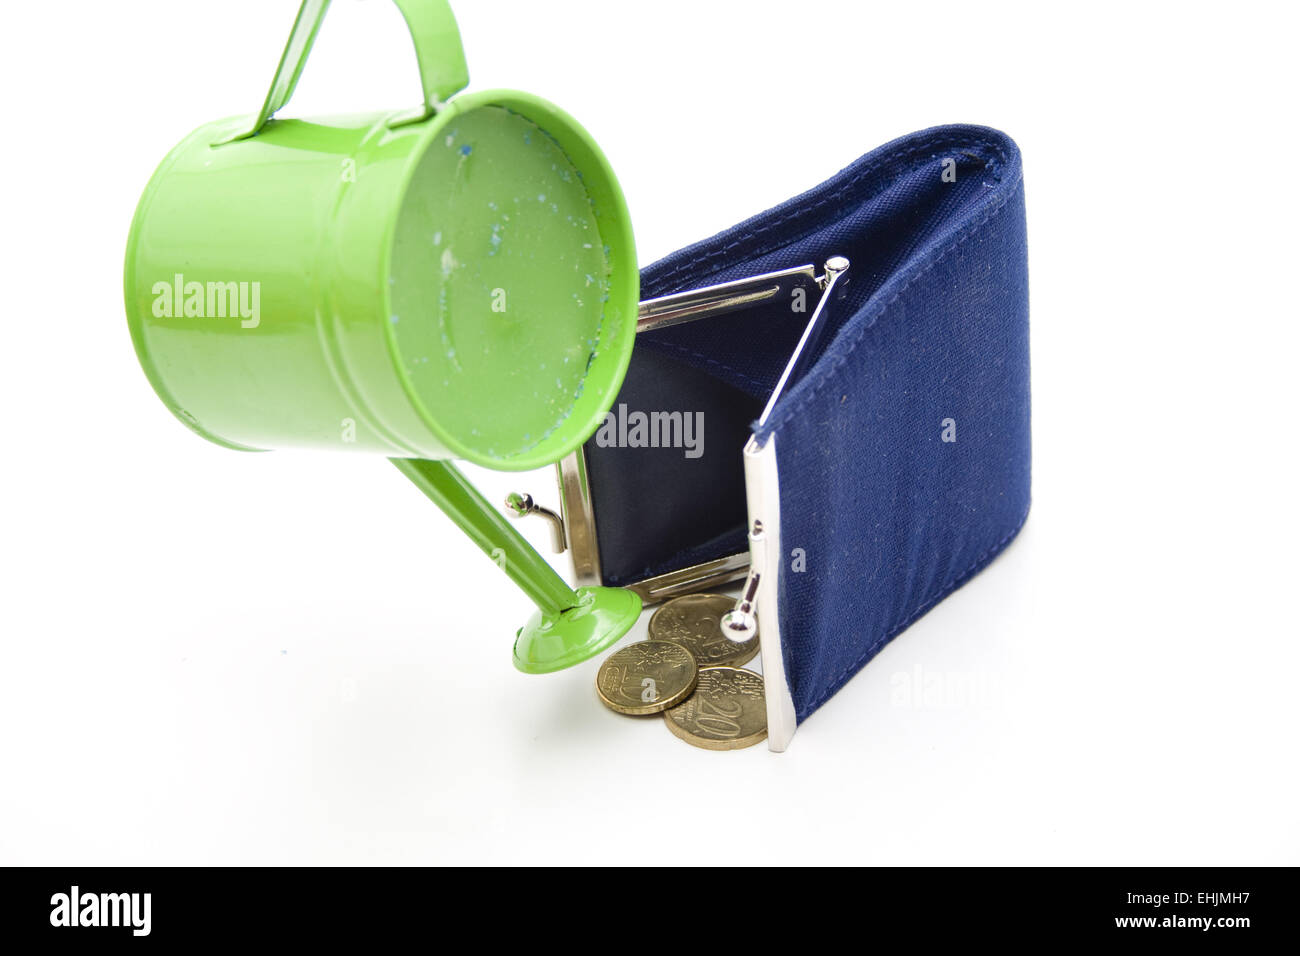 Frogs, snails and watering cans: The quirkiest bags from Kate Spade's new  collection